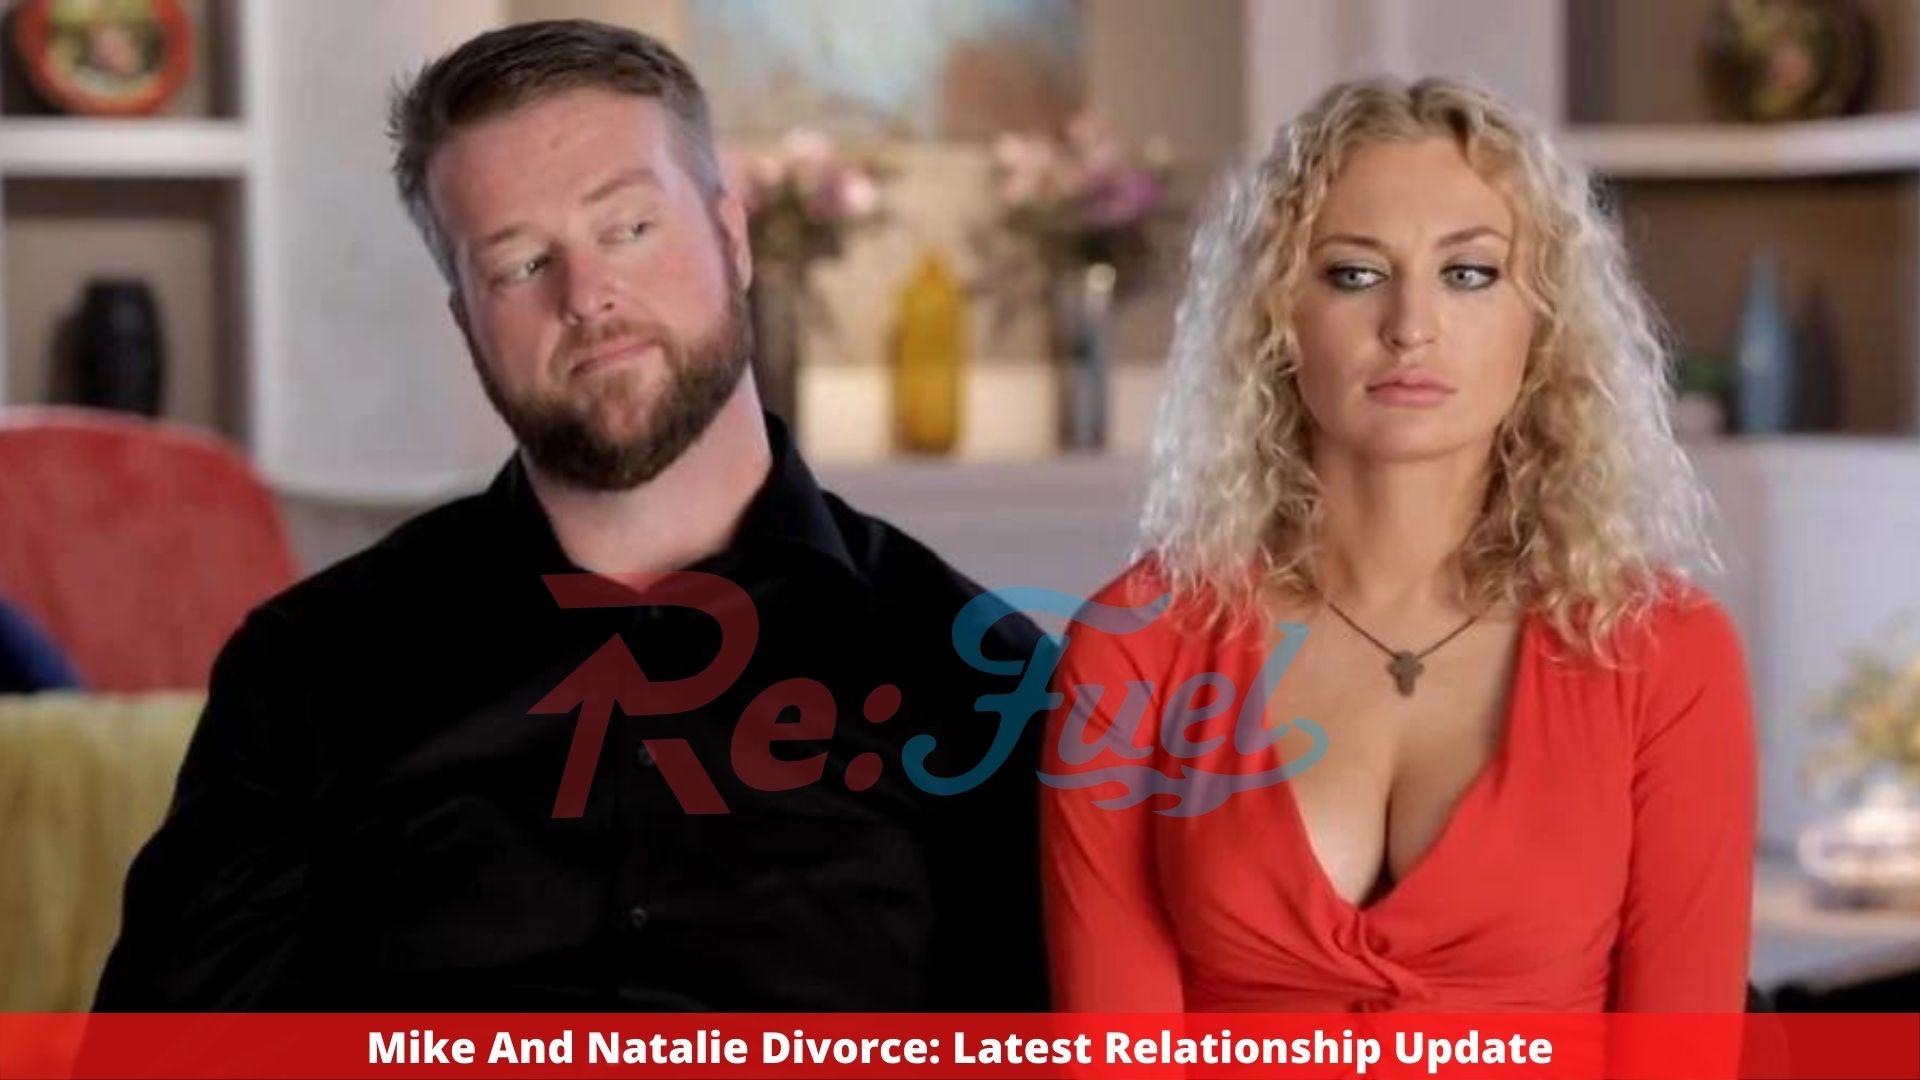 Mike And Natalie Divorce: Latest Relationship Update